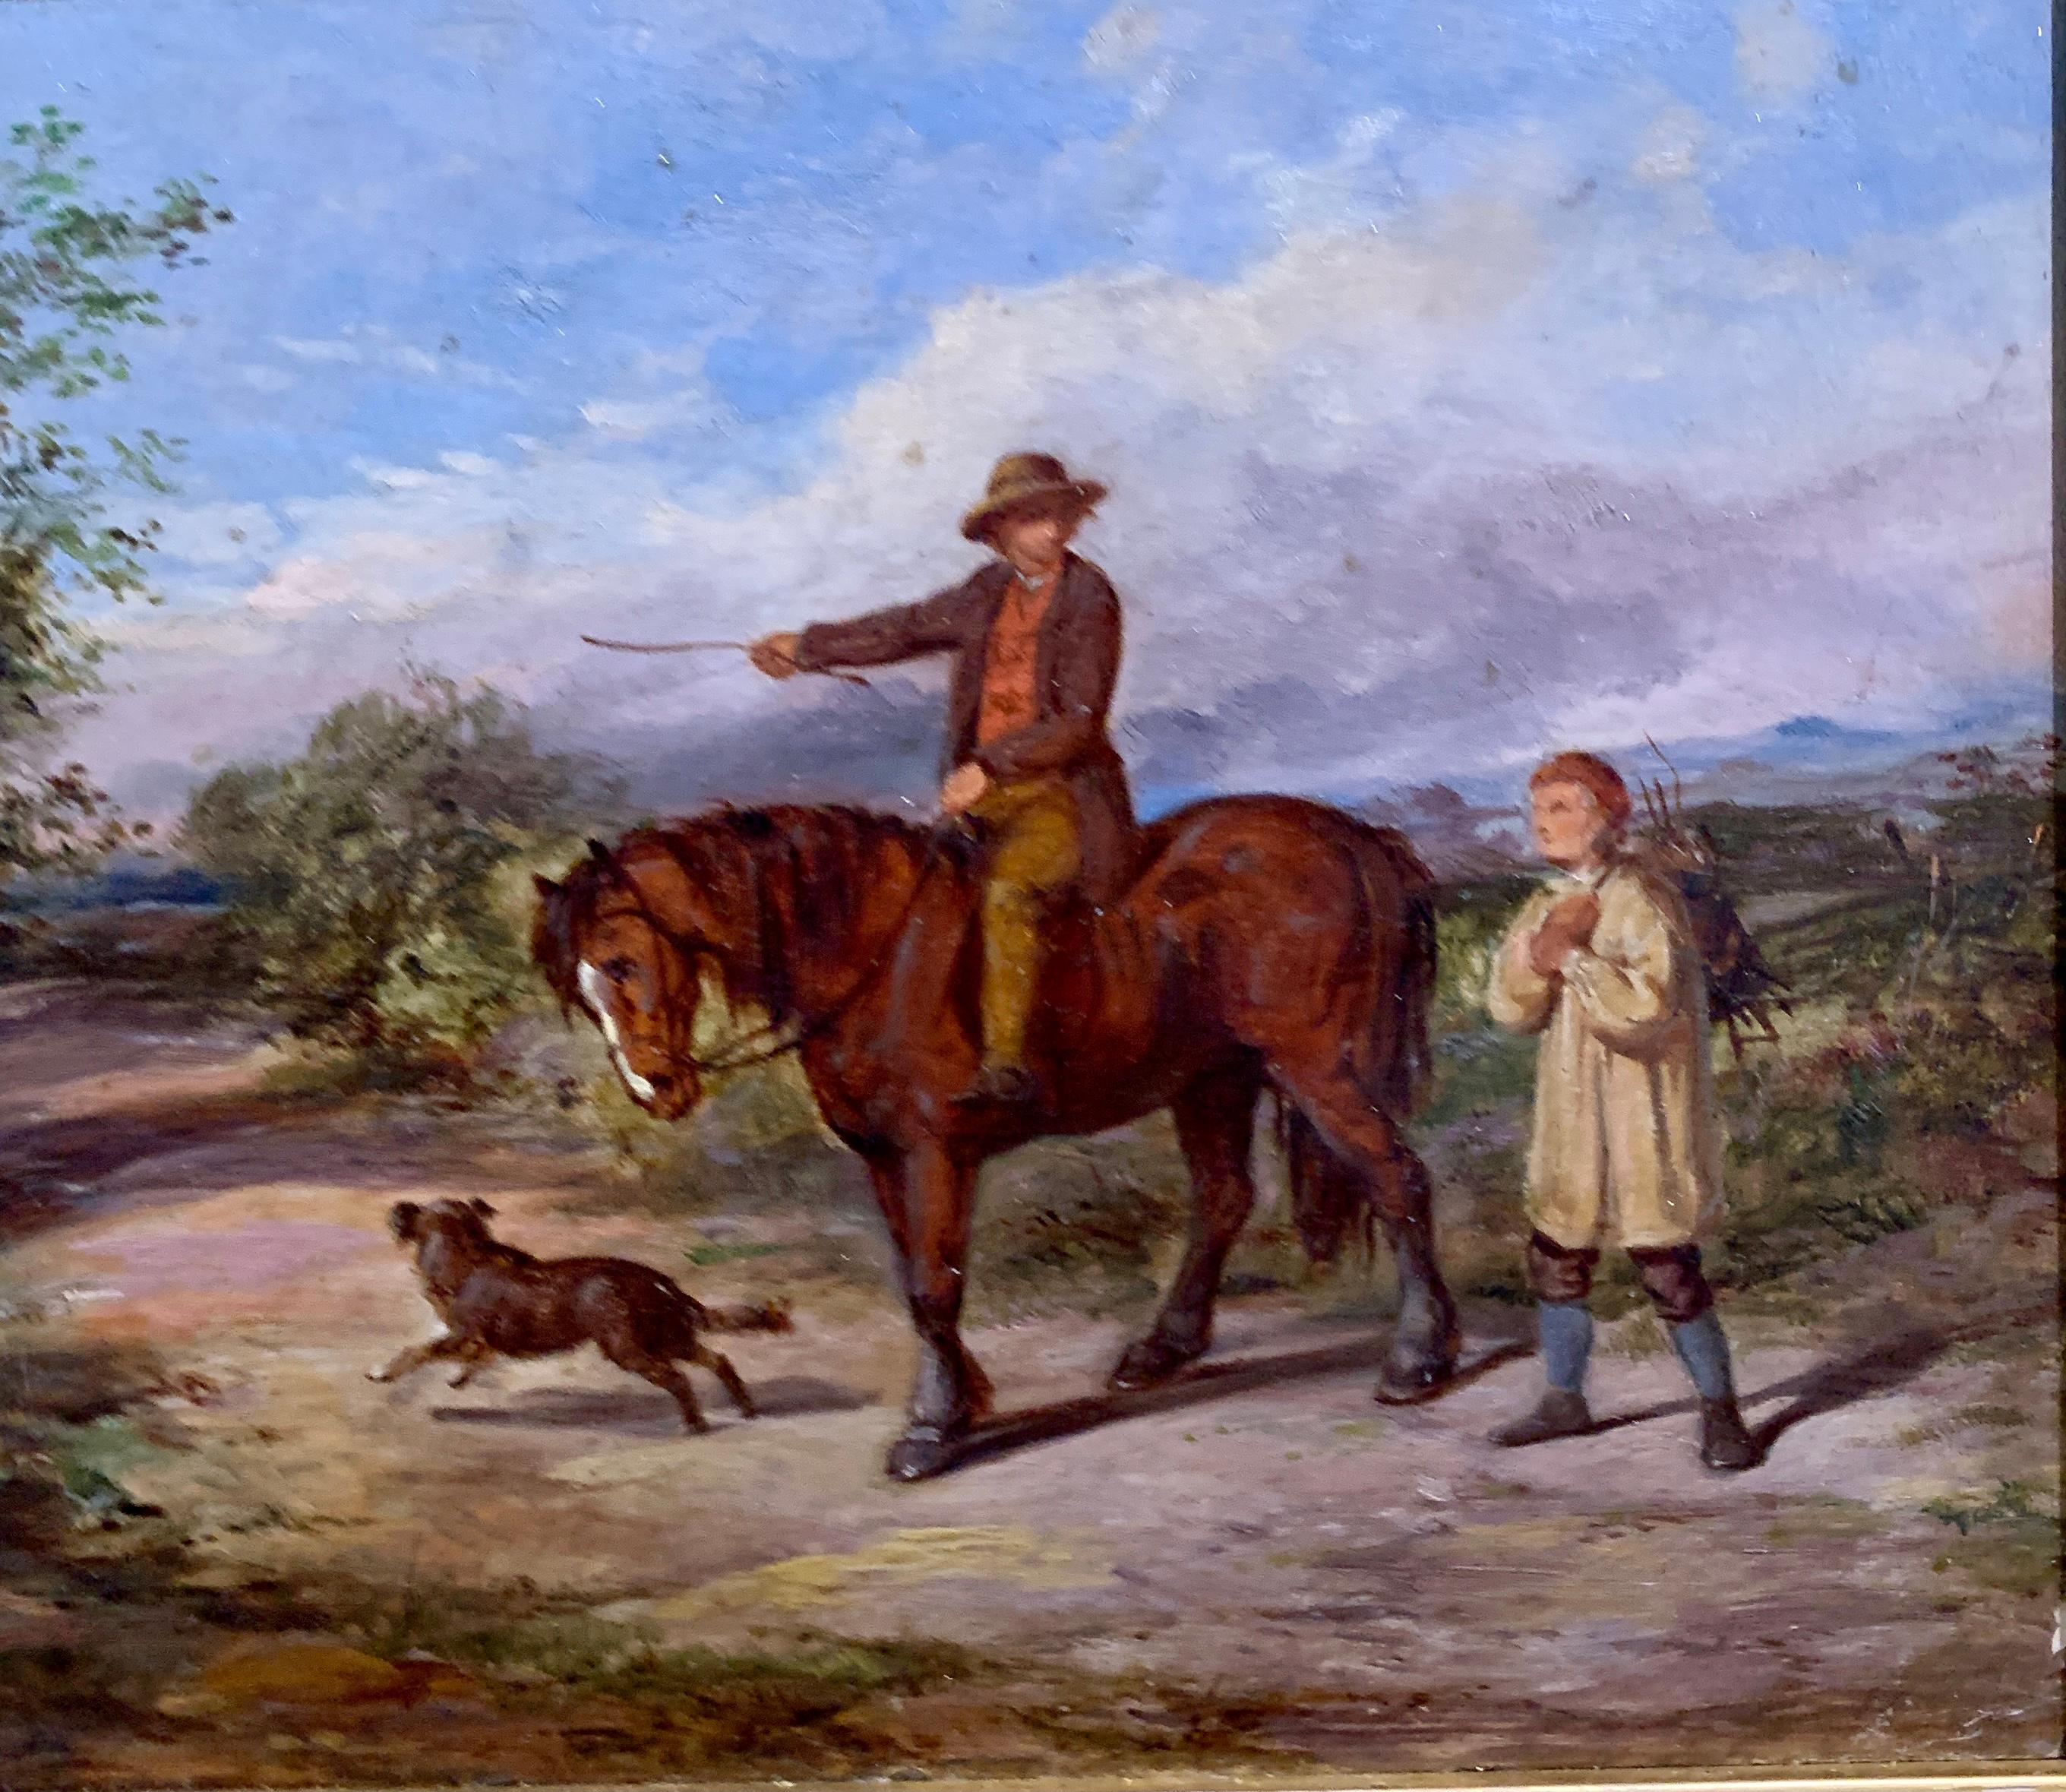 Antique English 19th century man with horse in landscape on pathway with friend - Painting by David Hardy